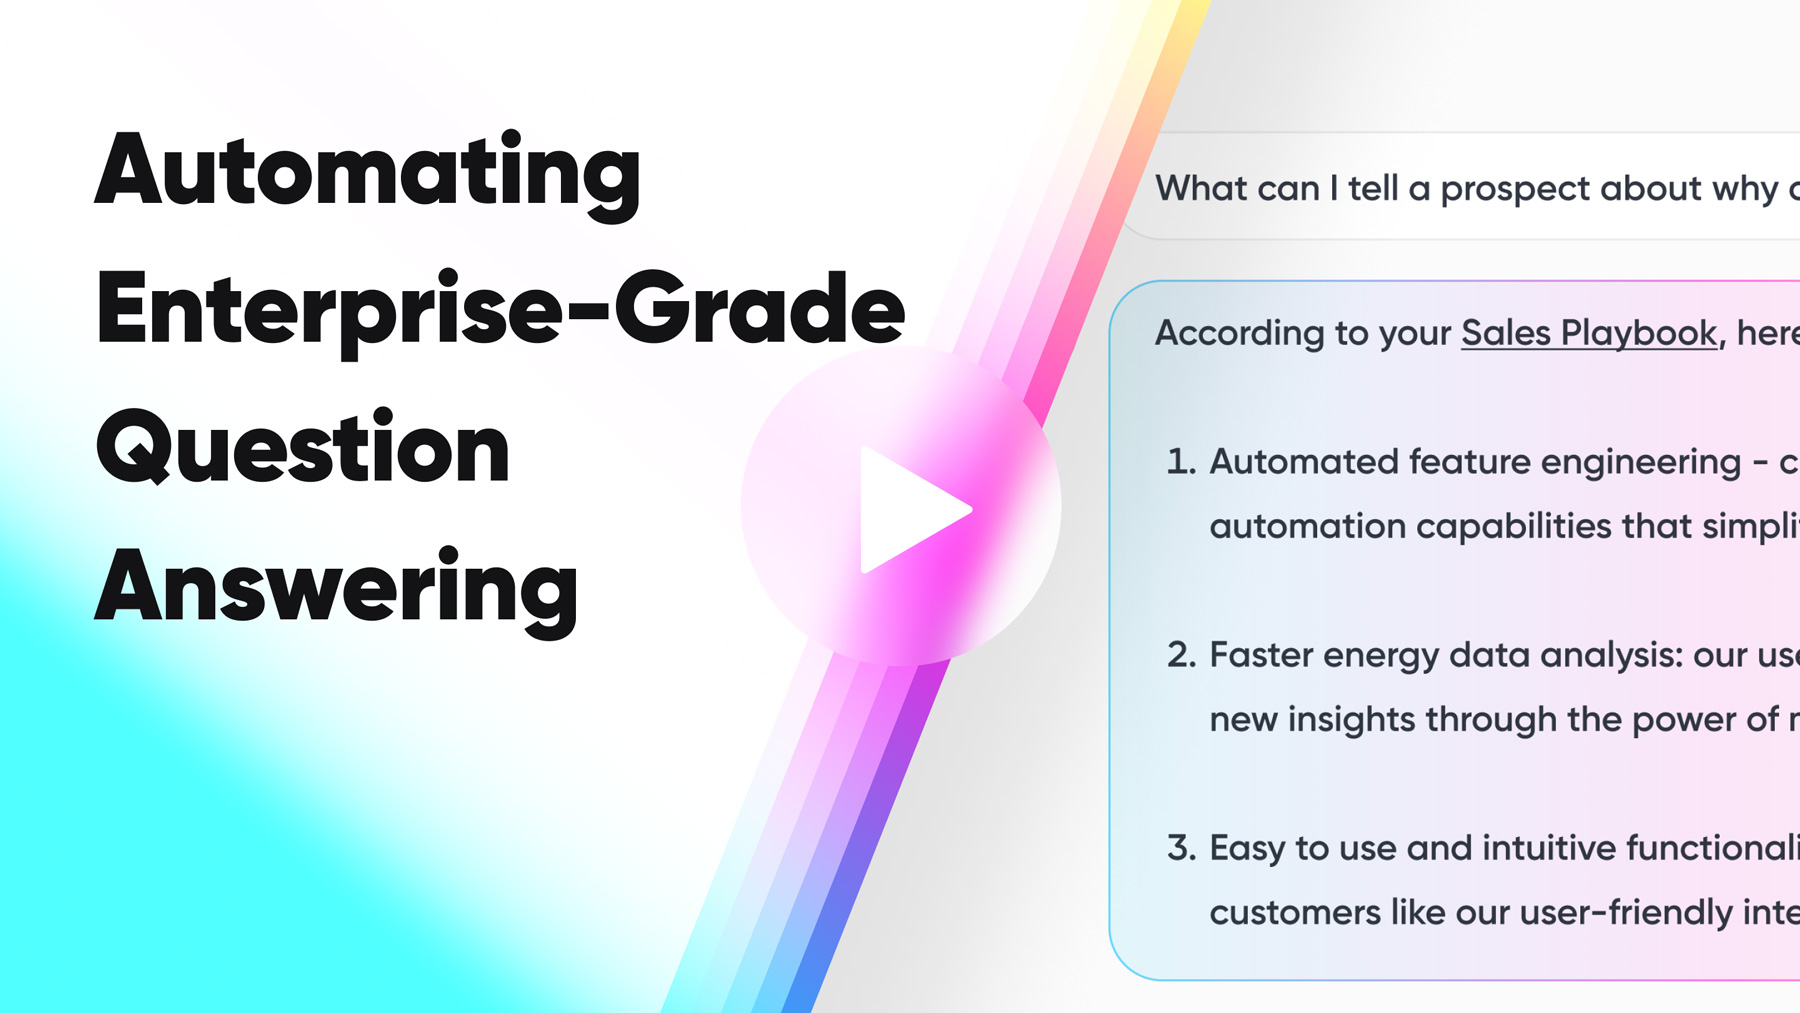 How to Automate Enterprise Question Answering